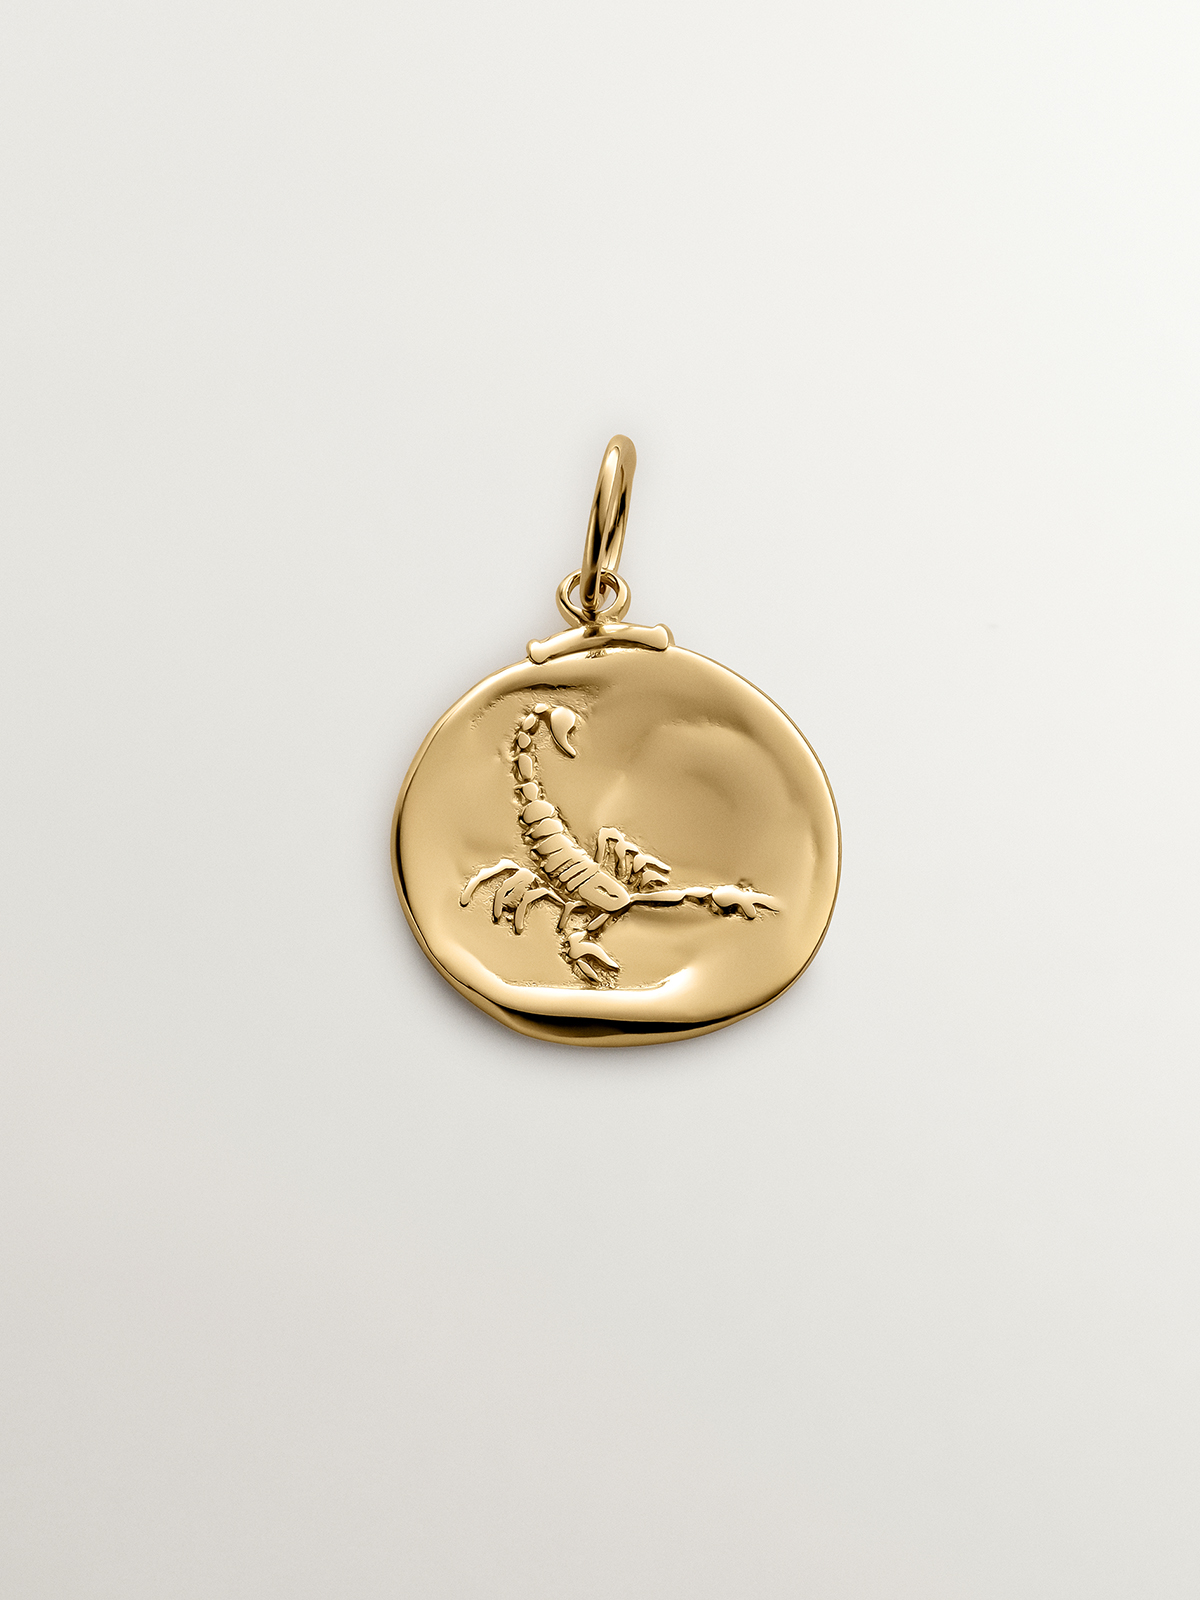 925 Silver Scorpio Charm coated in 18K yellow gold